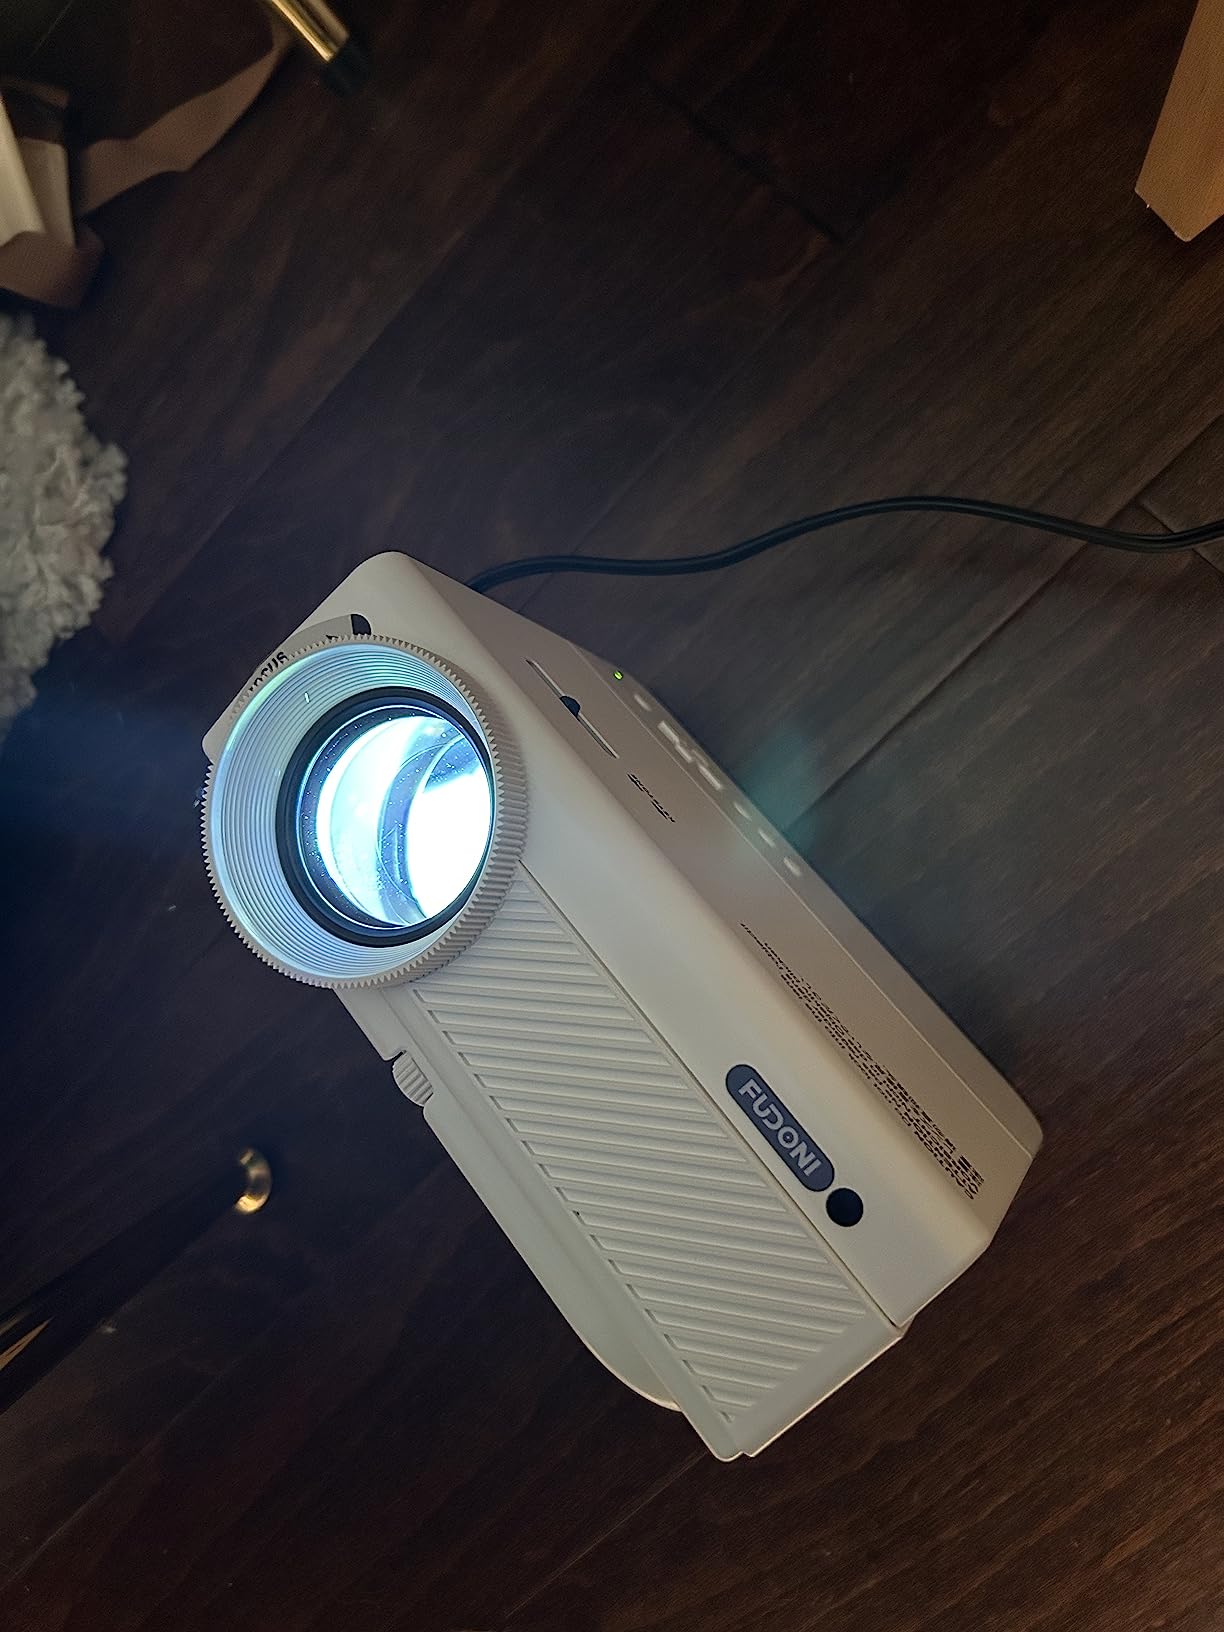 Fudoni V7 Projector Review: Is it worth the hype ?